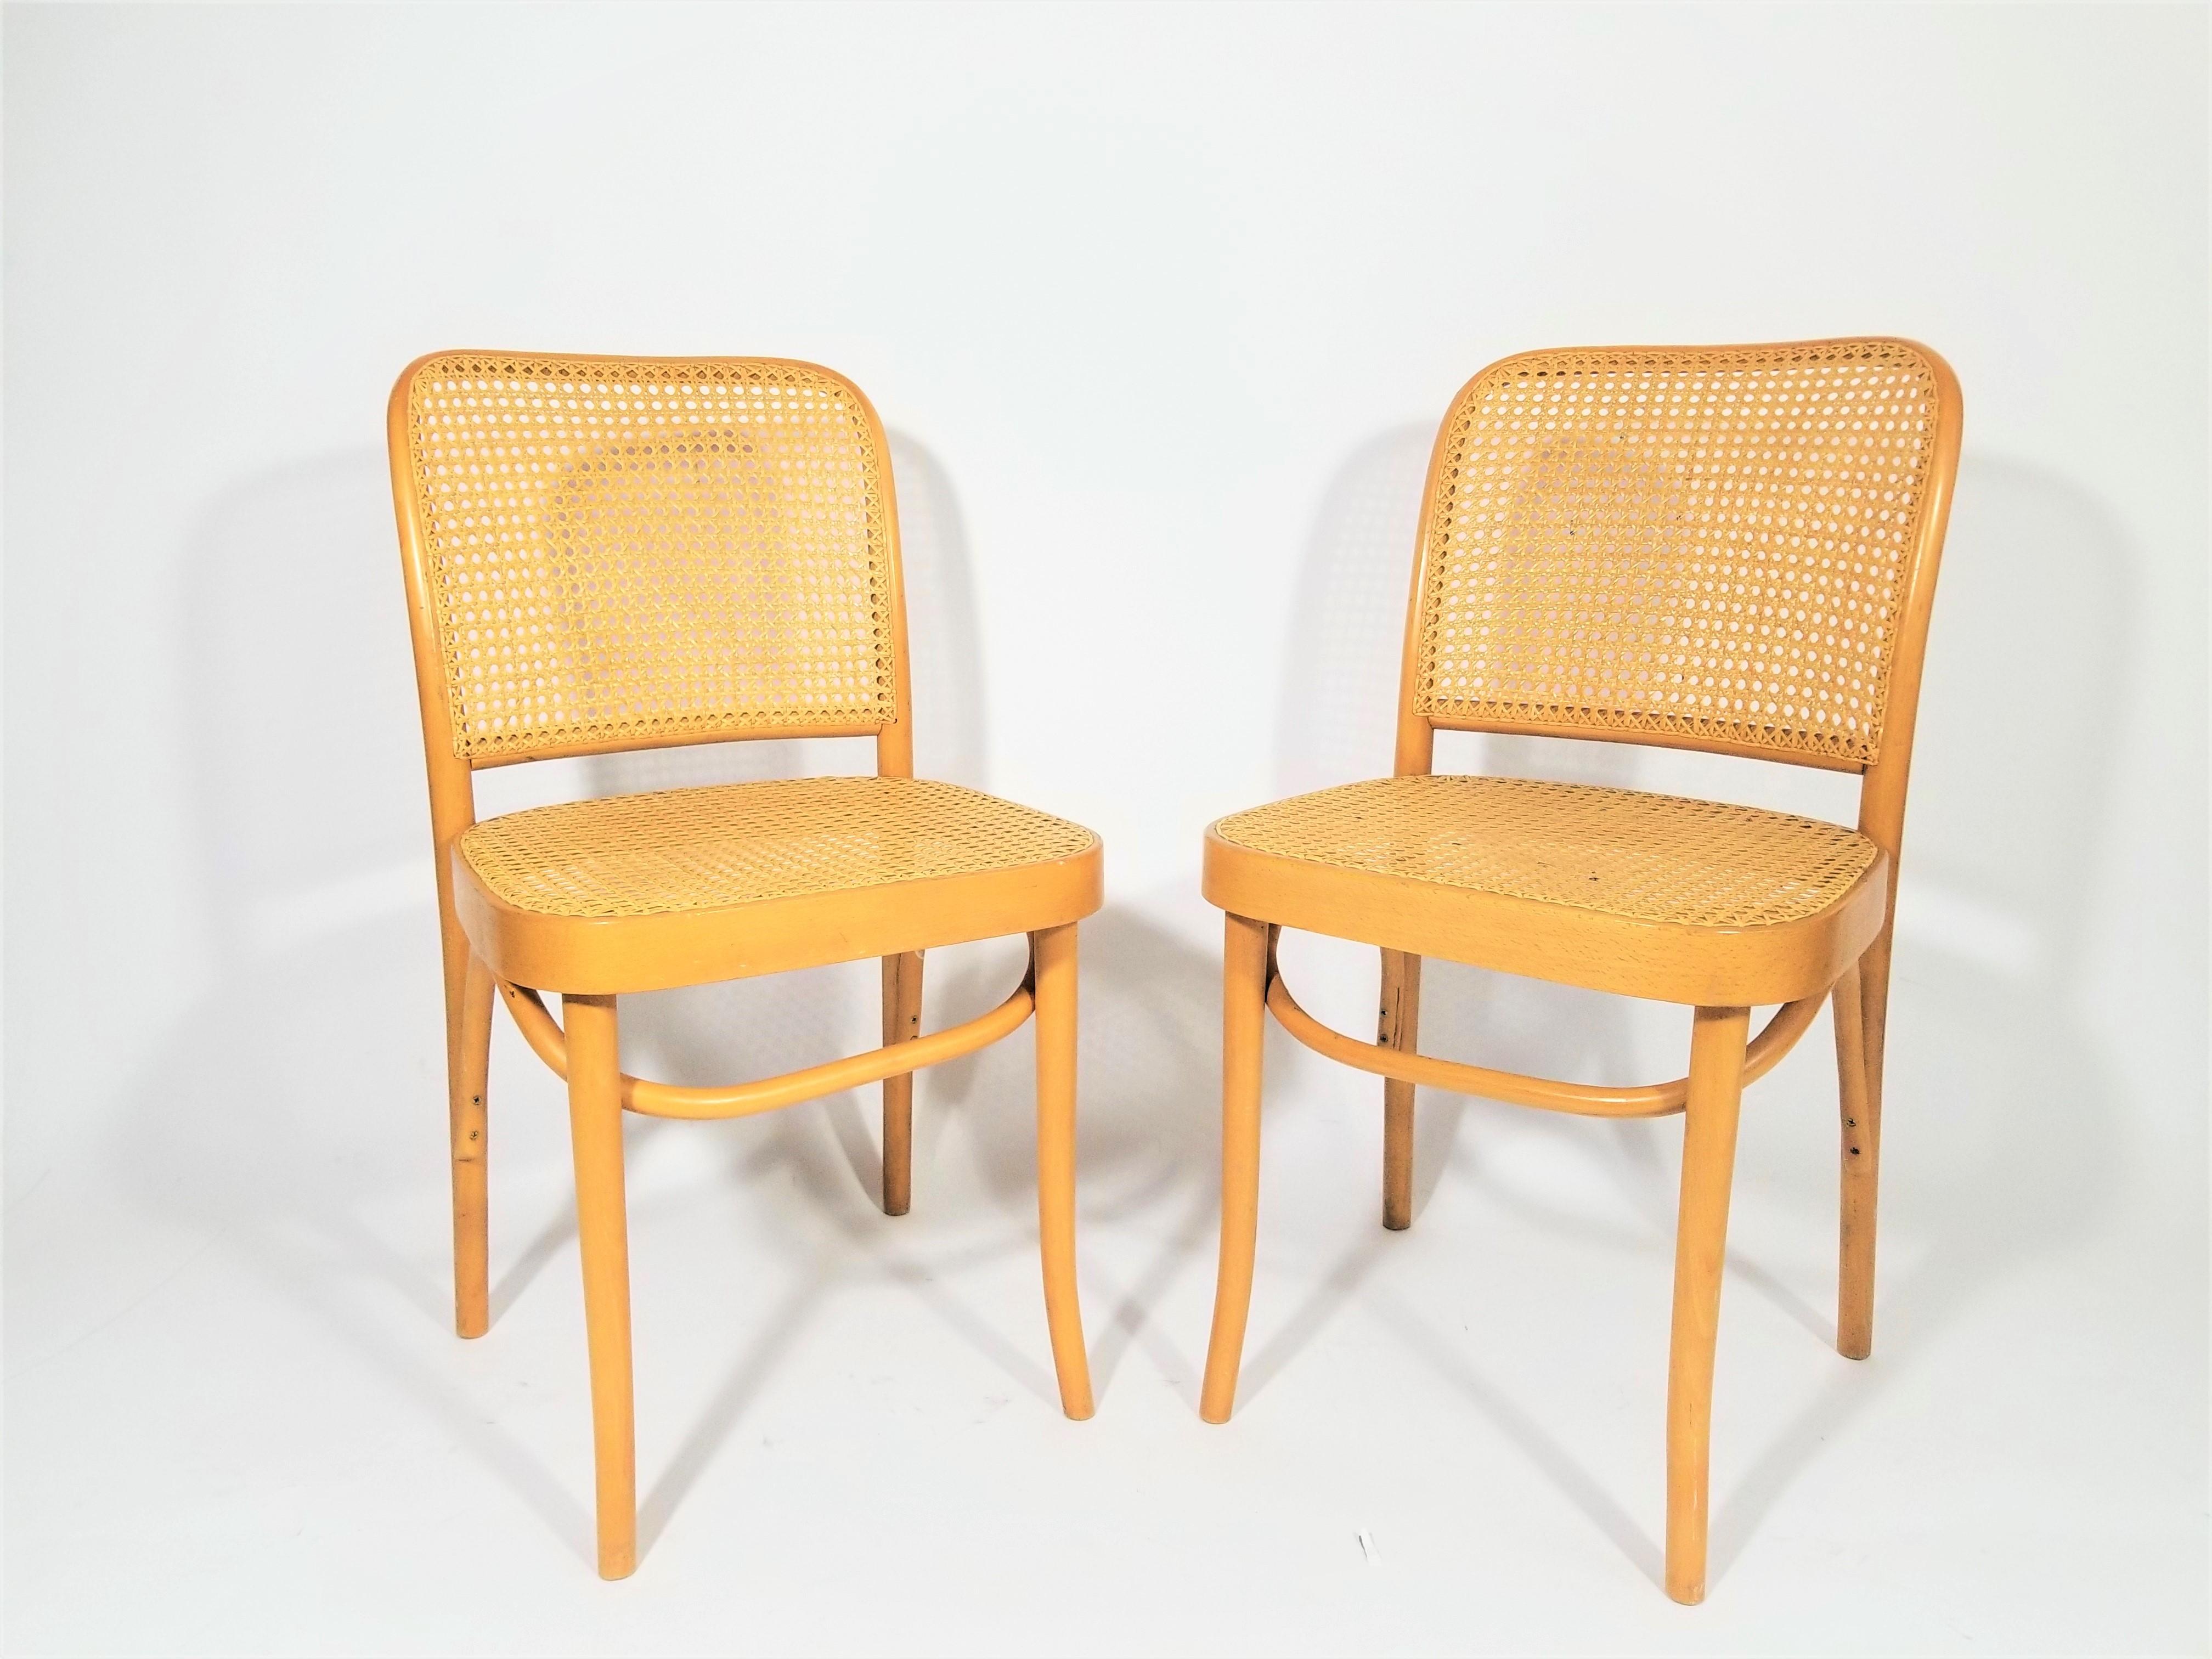 Antique pair of Josef Hoffmann cane bentwood side chairs. Made in Poland. Designed by Josef Hoffmann in 1920s.
Complimentary delivery can be arranged for this item in NYC and surrounding areas.